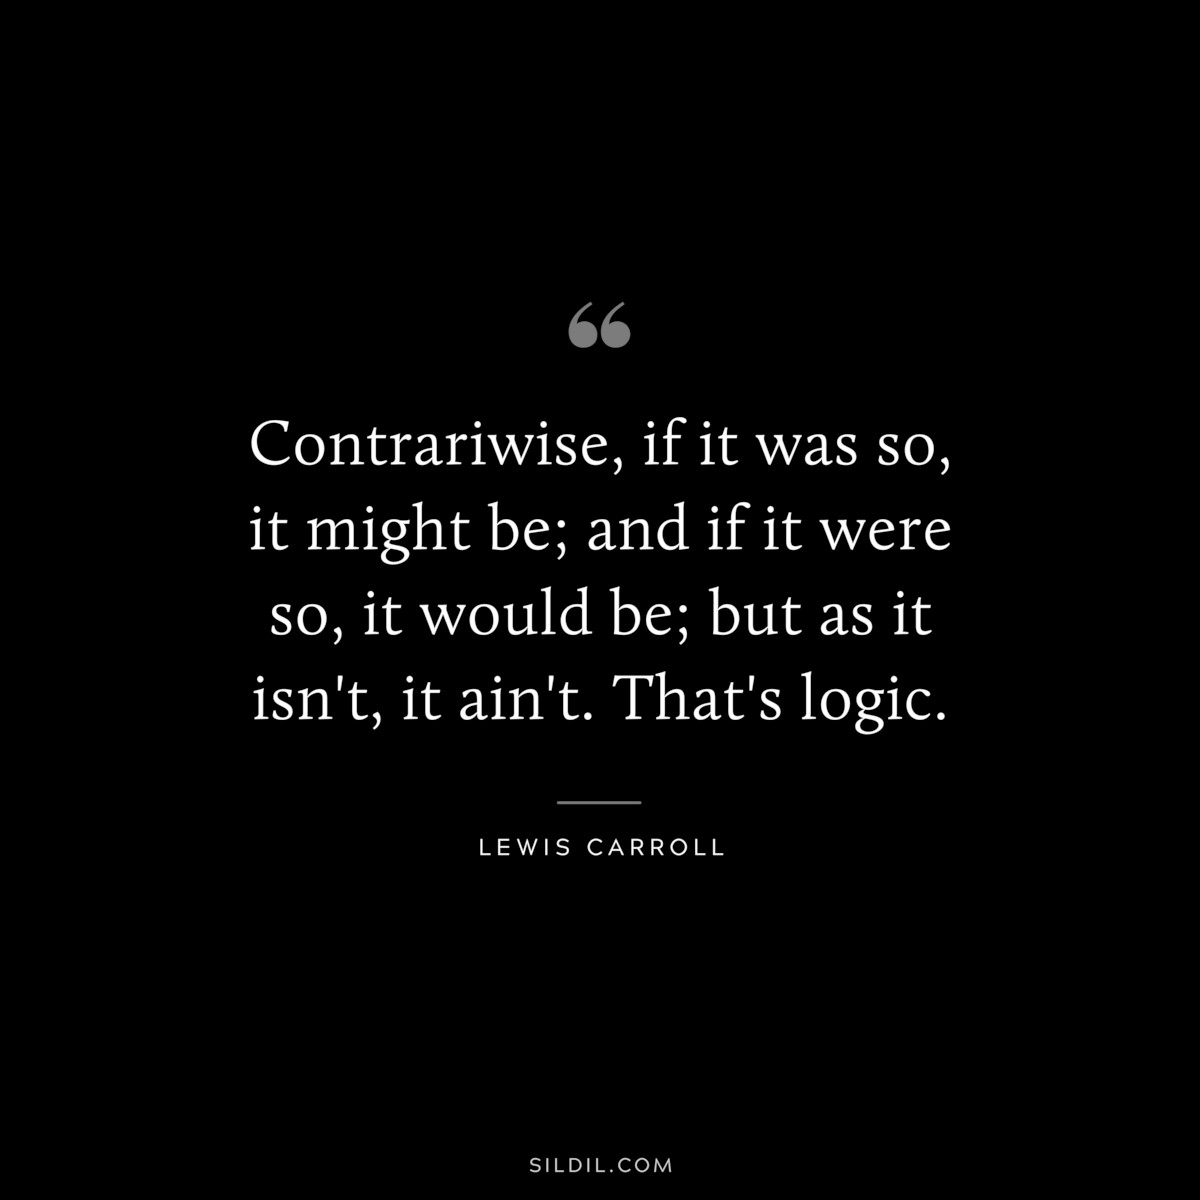 Contrariwise, if it was so, it might be; and if it were so, it would be; but as it isn't, it ain't. That's logic.